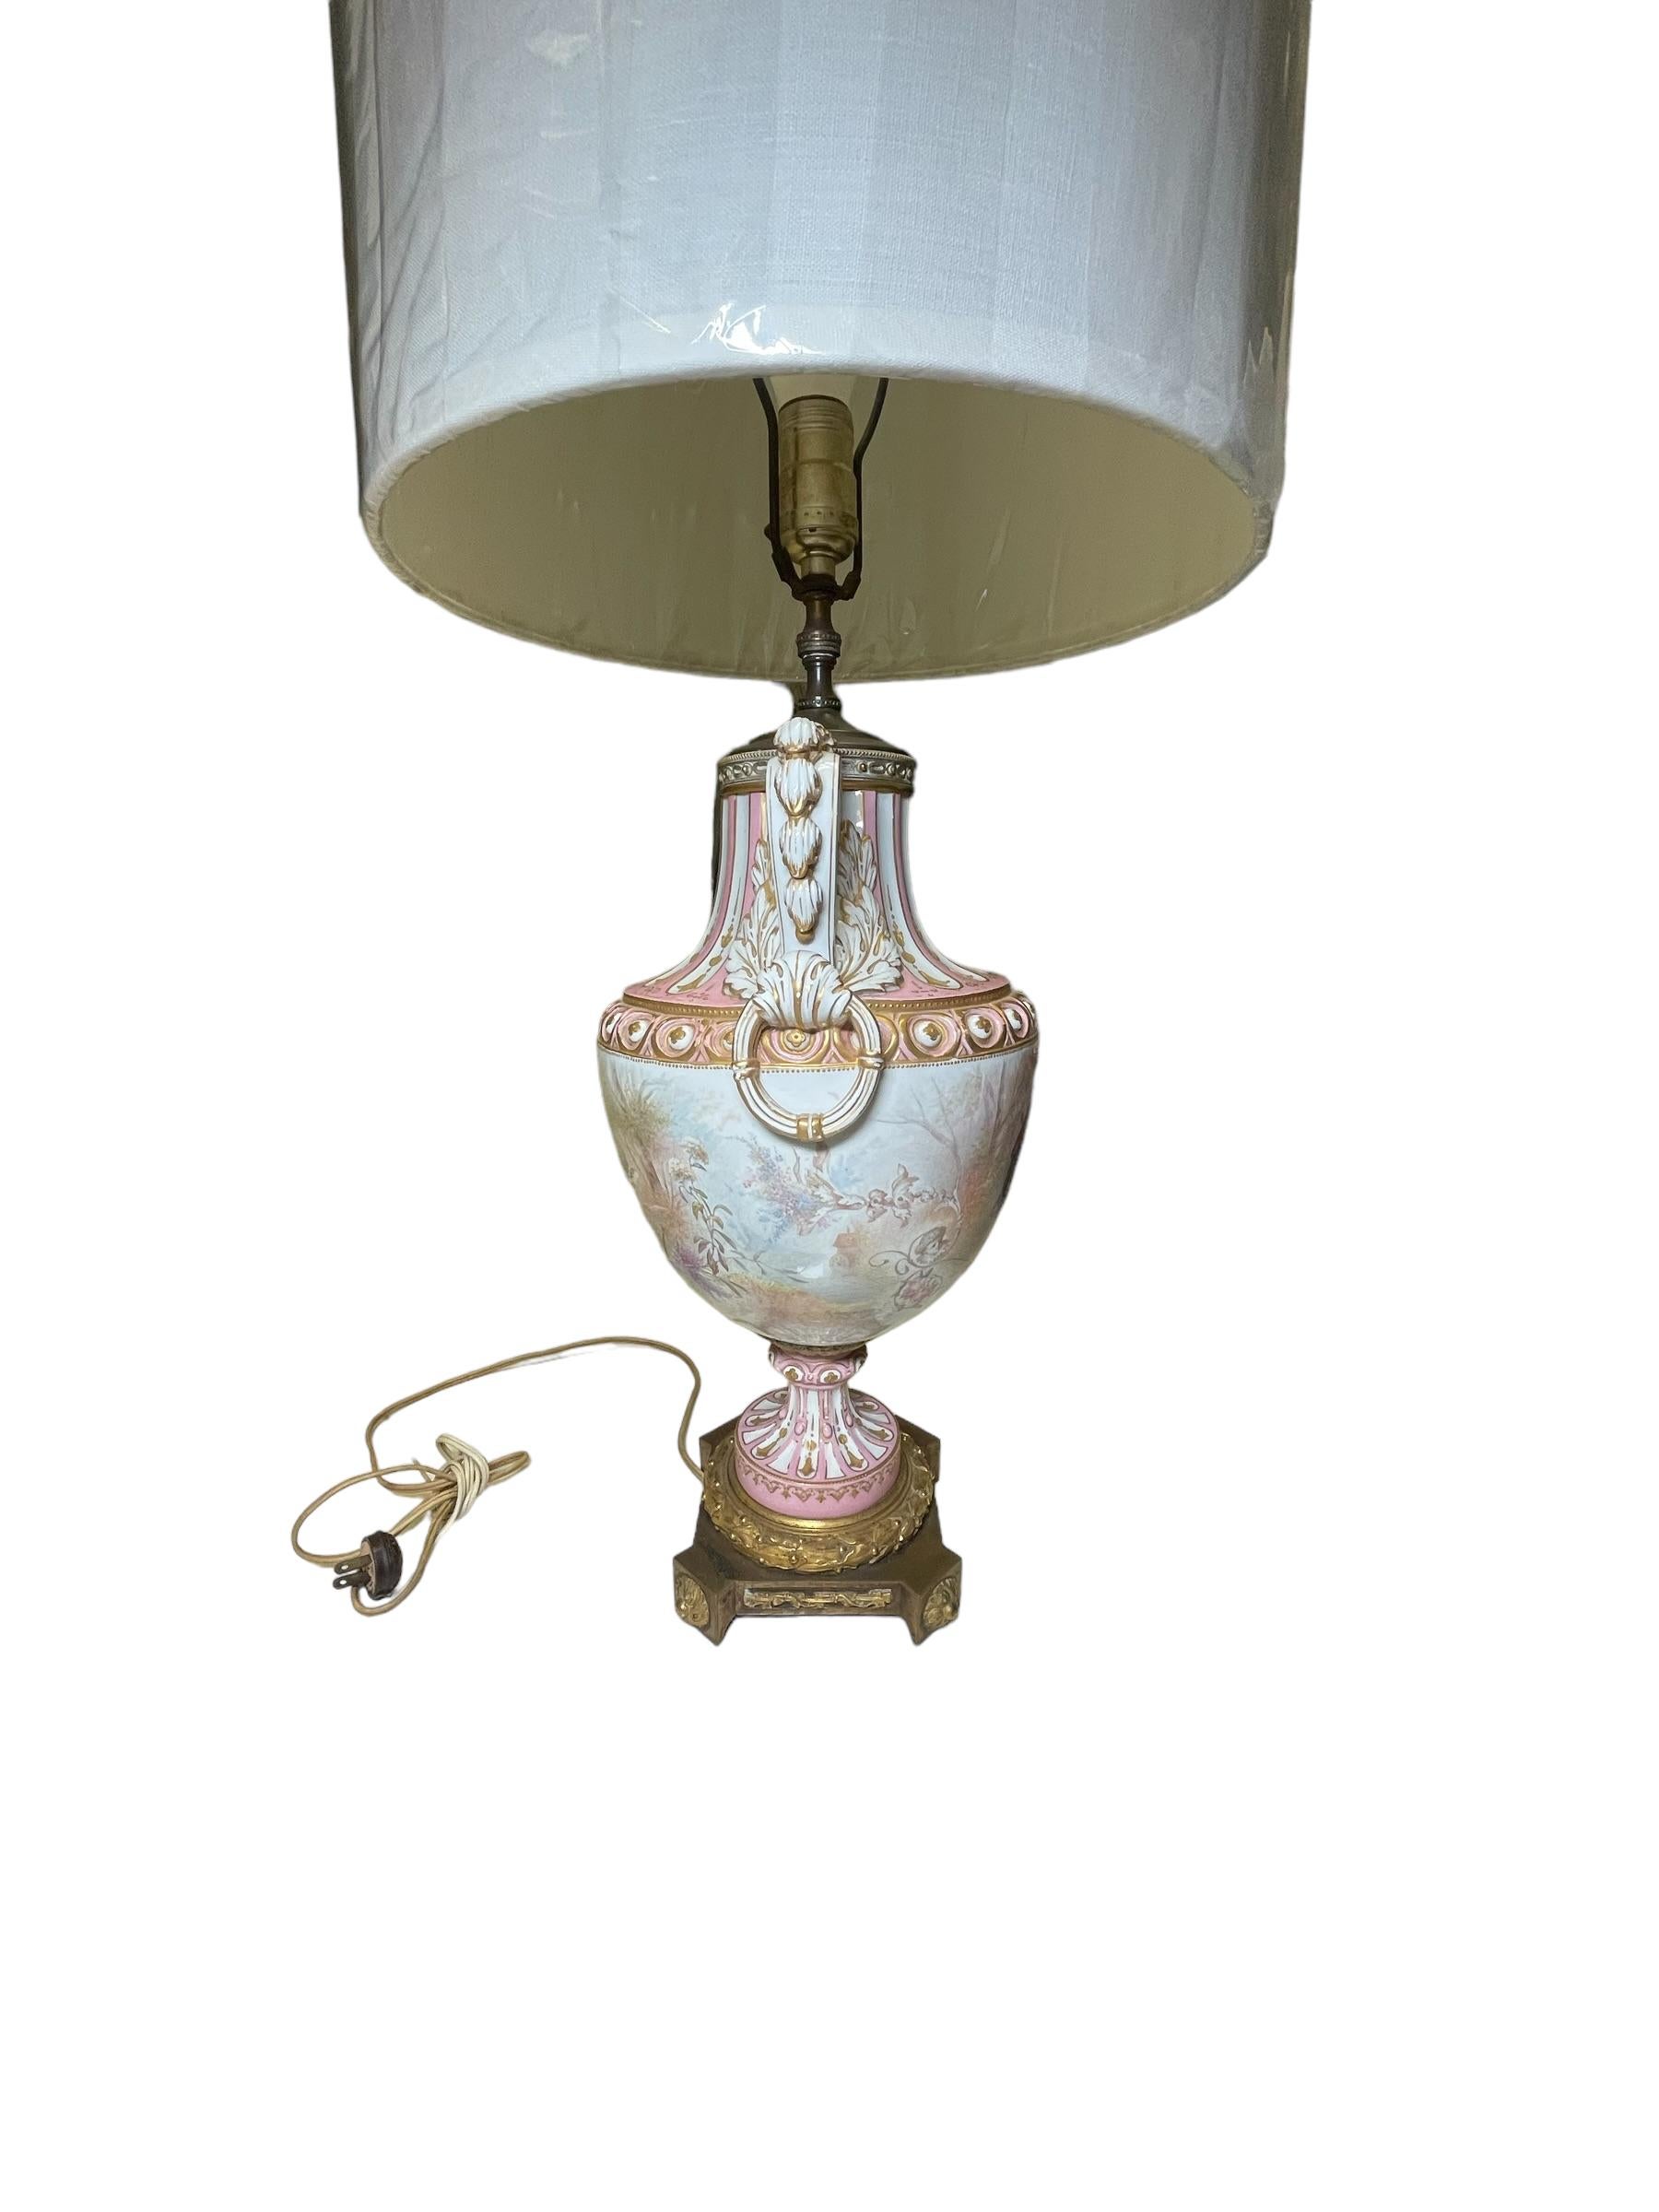 M. Demonceaux Sevres Style Porcelain Bronze Mounted Urn Table Lamp For Sale 5